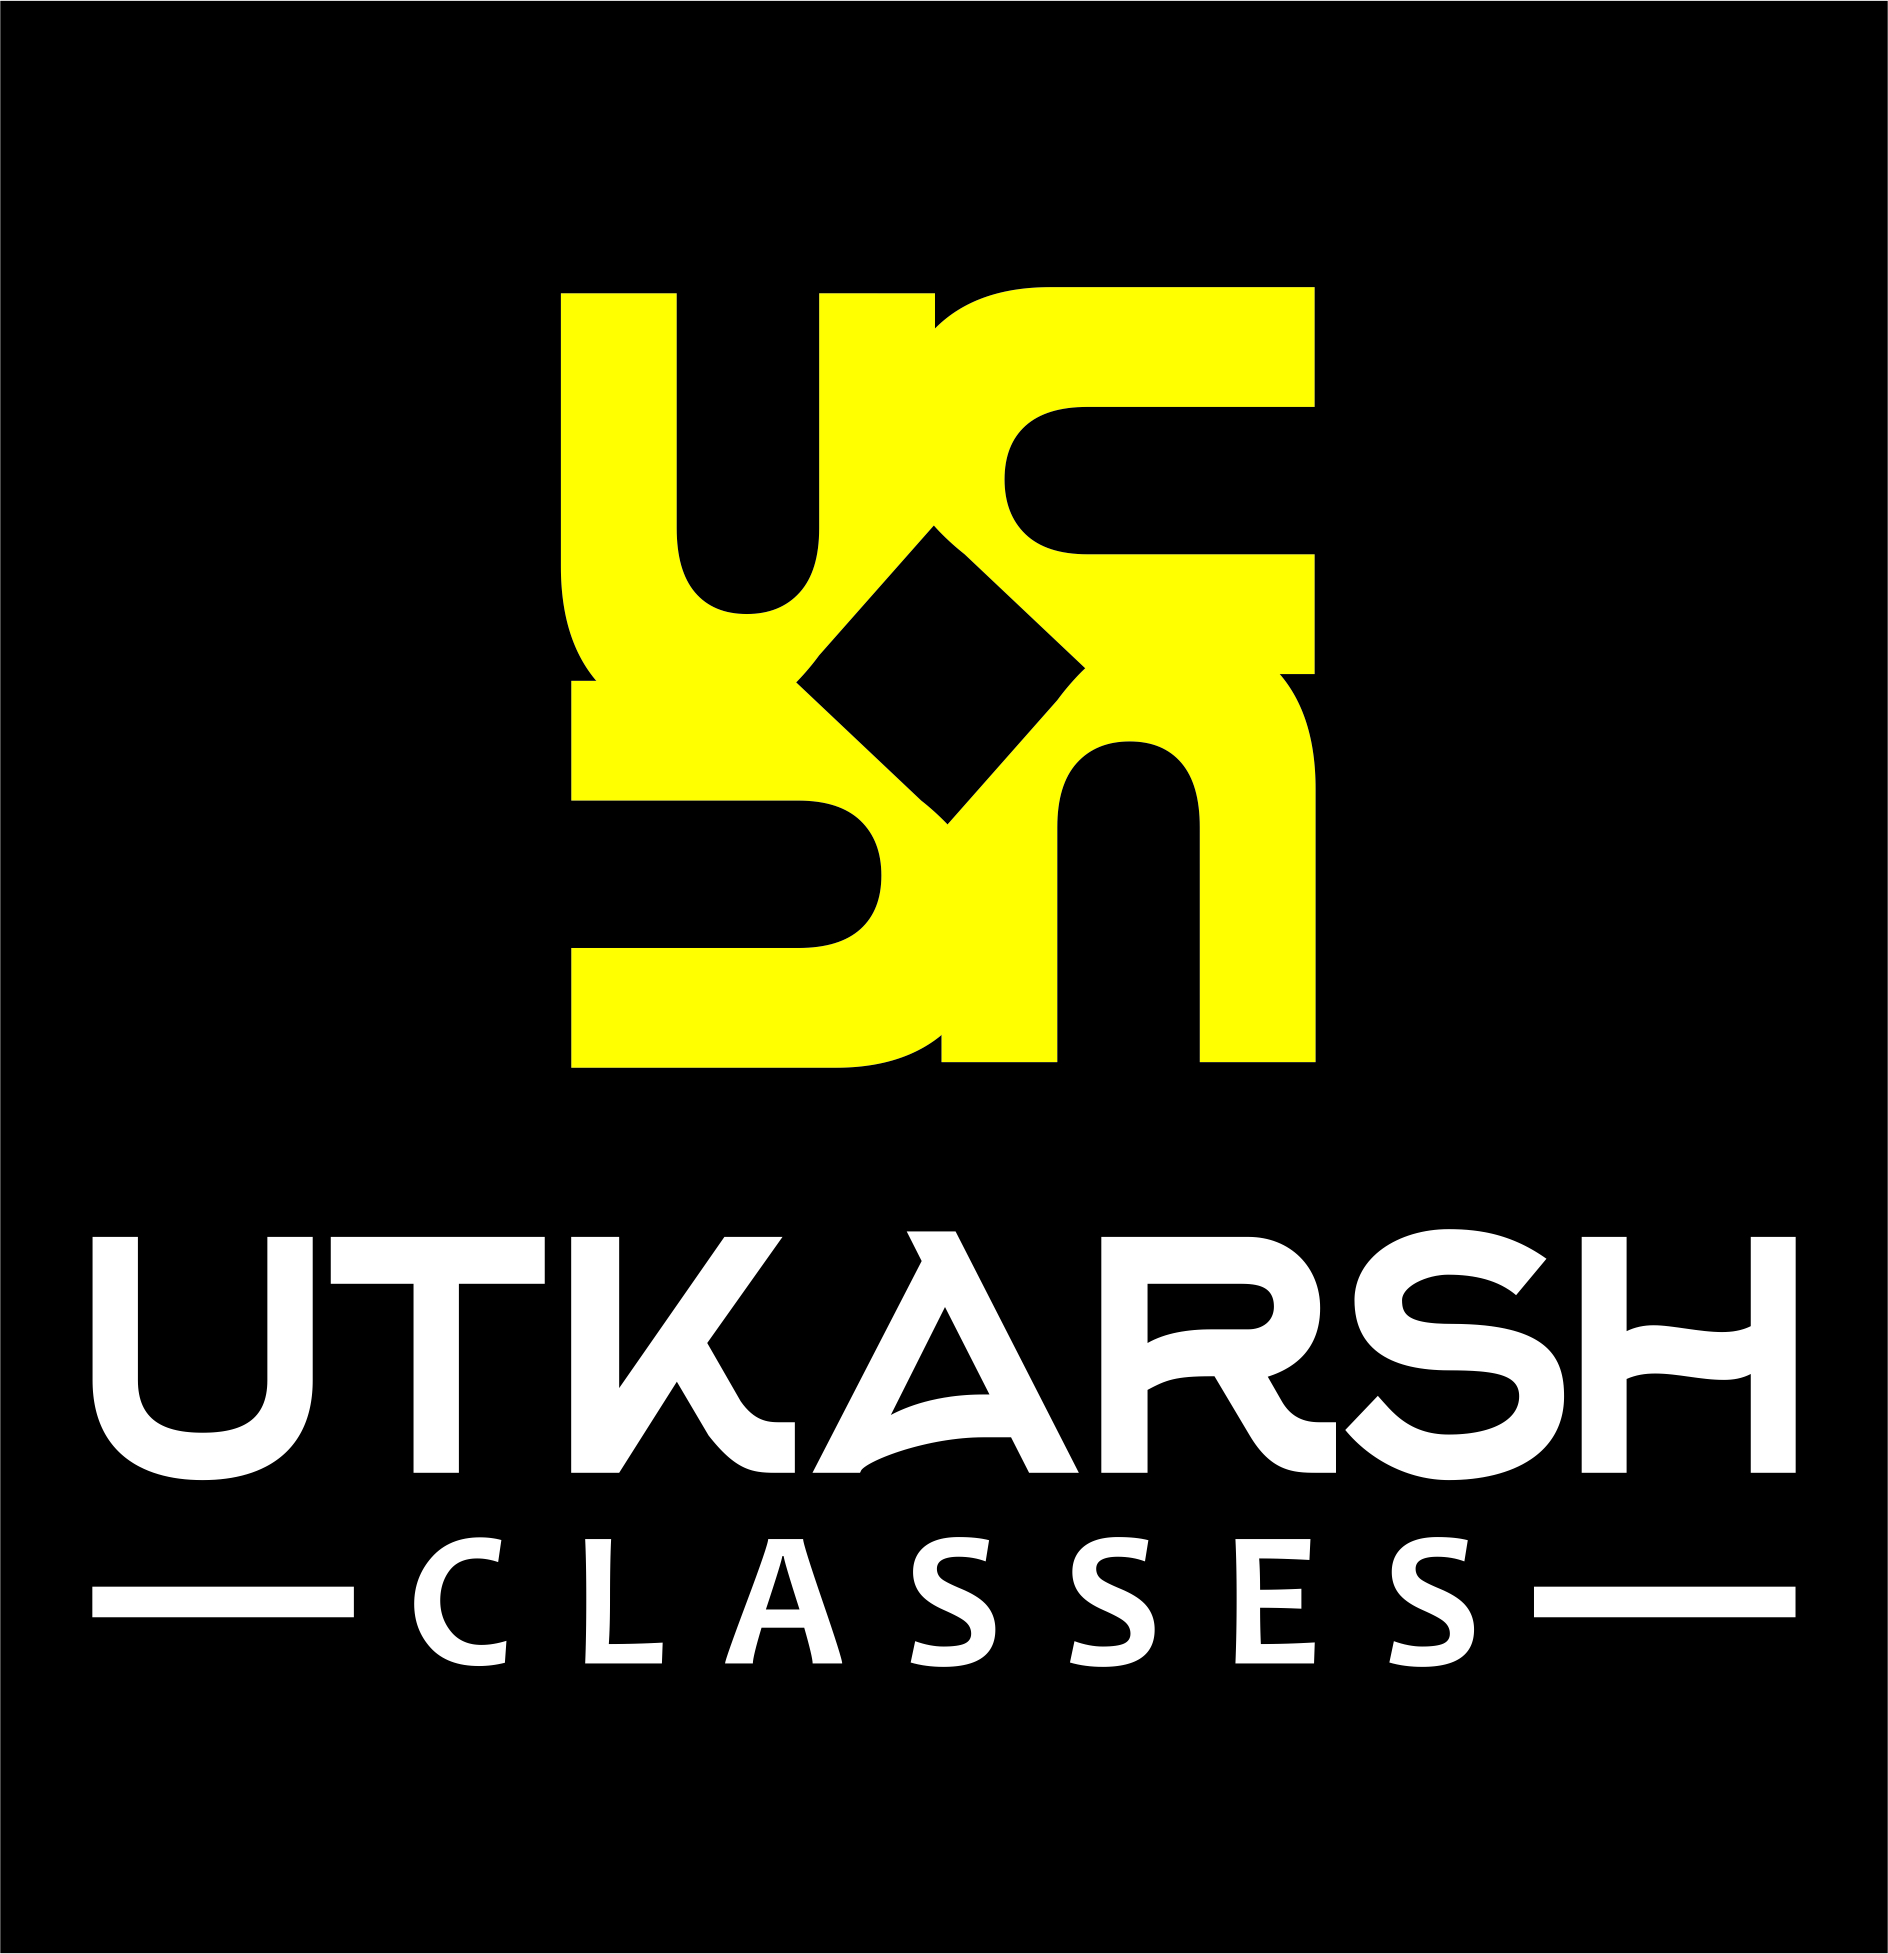 utkarsh-classes-has-surpassed-10-million-subscribers-on-youtube-and-app-downloads